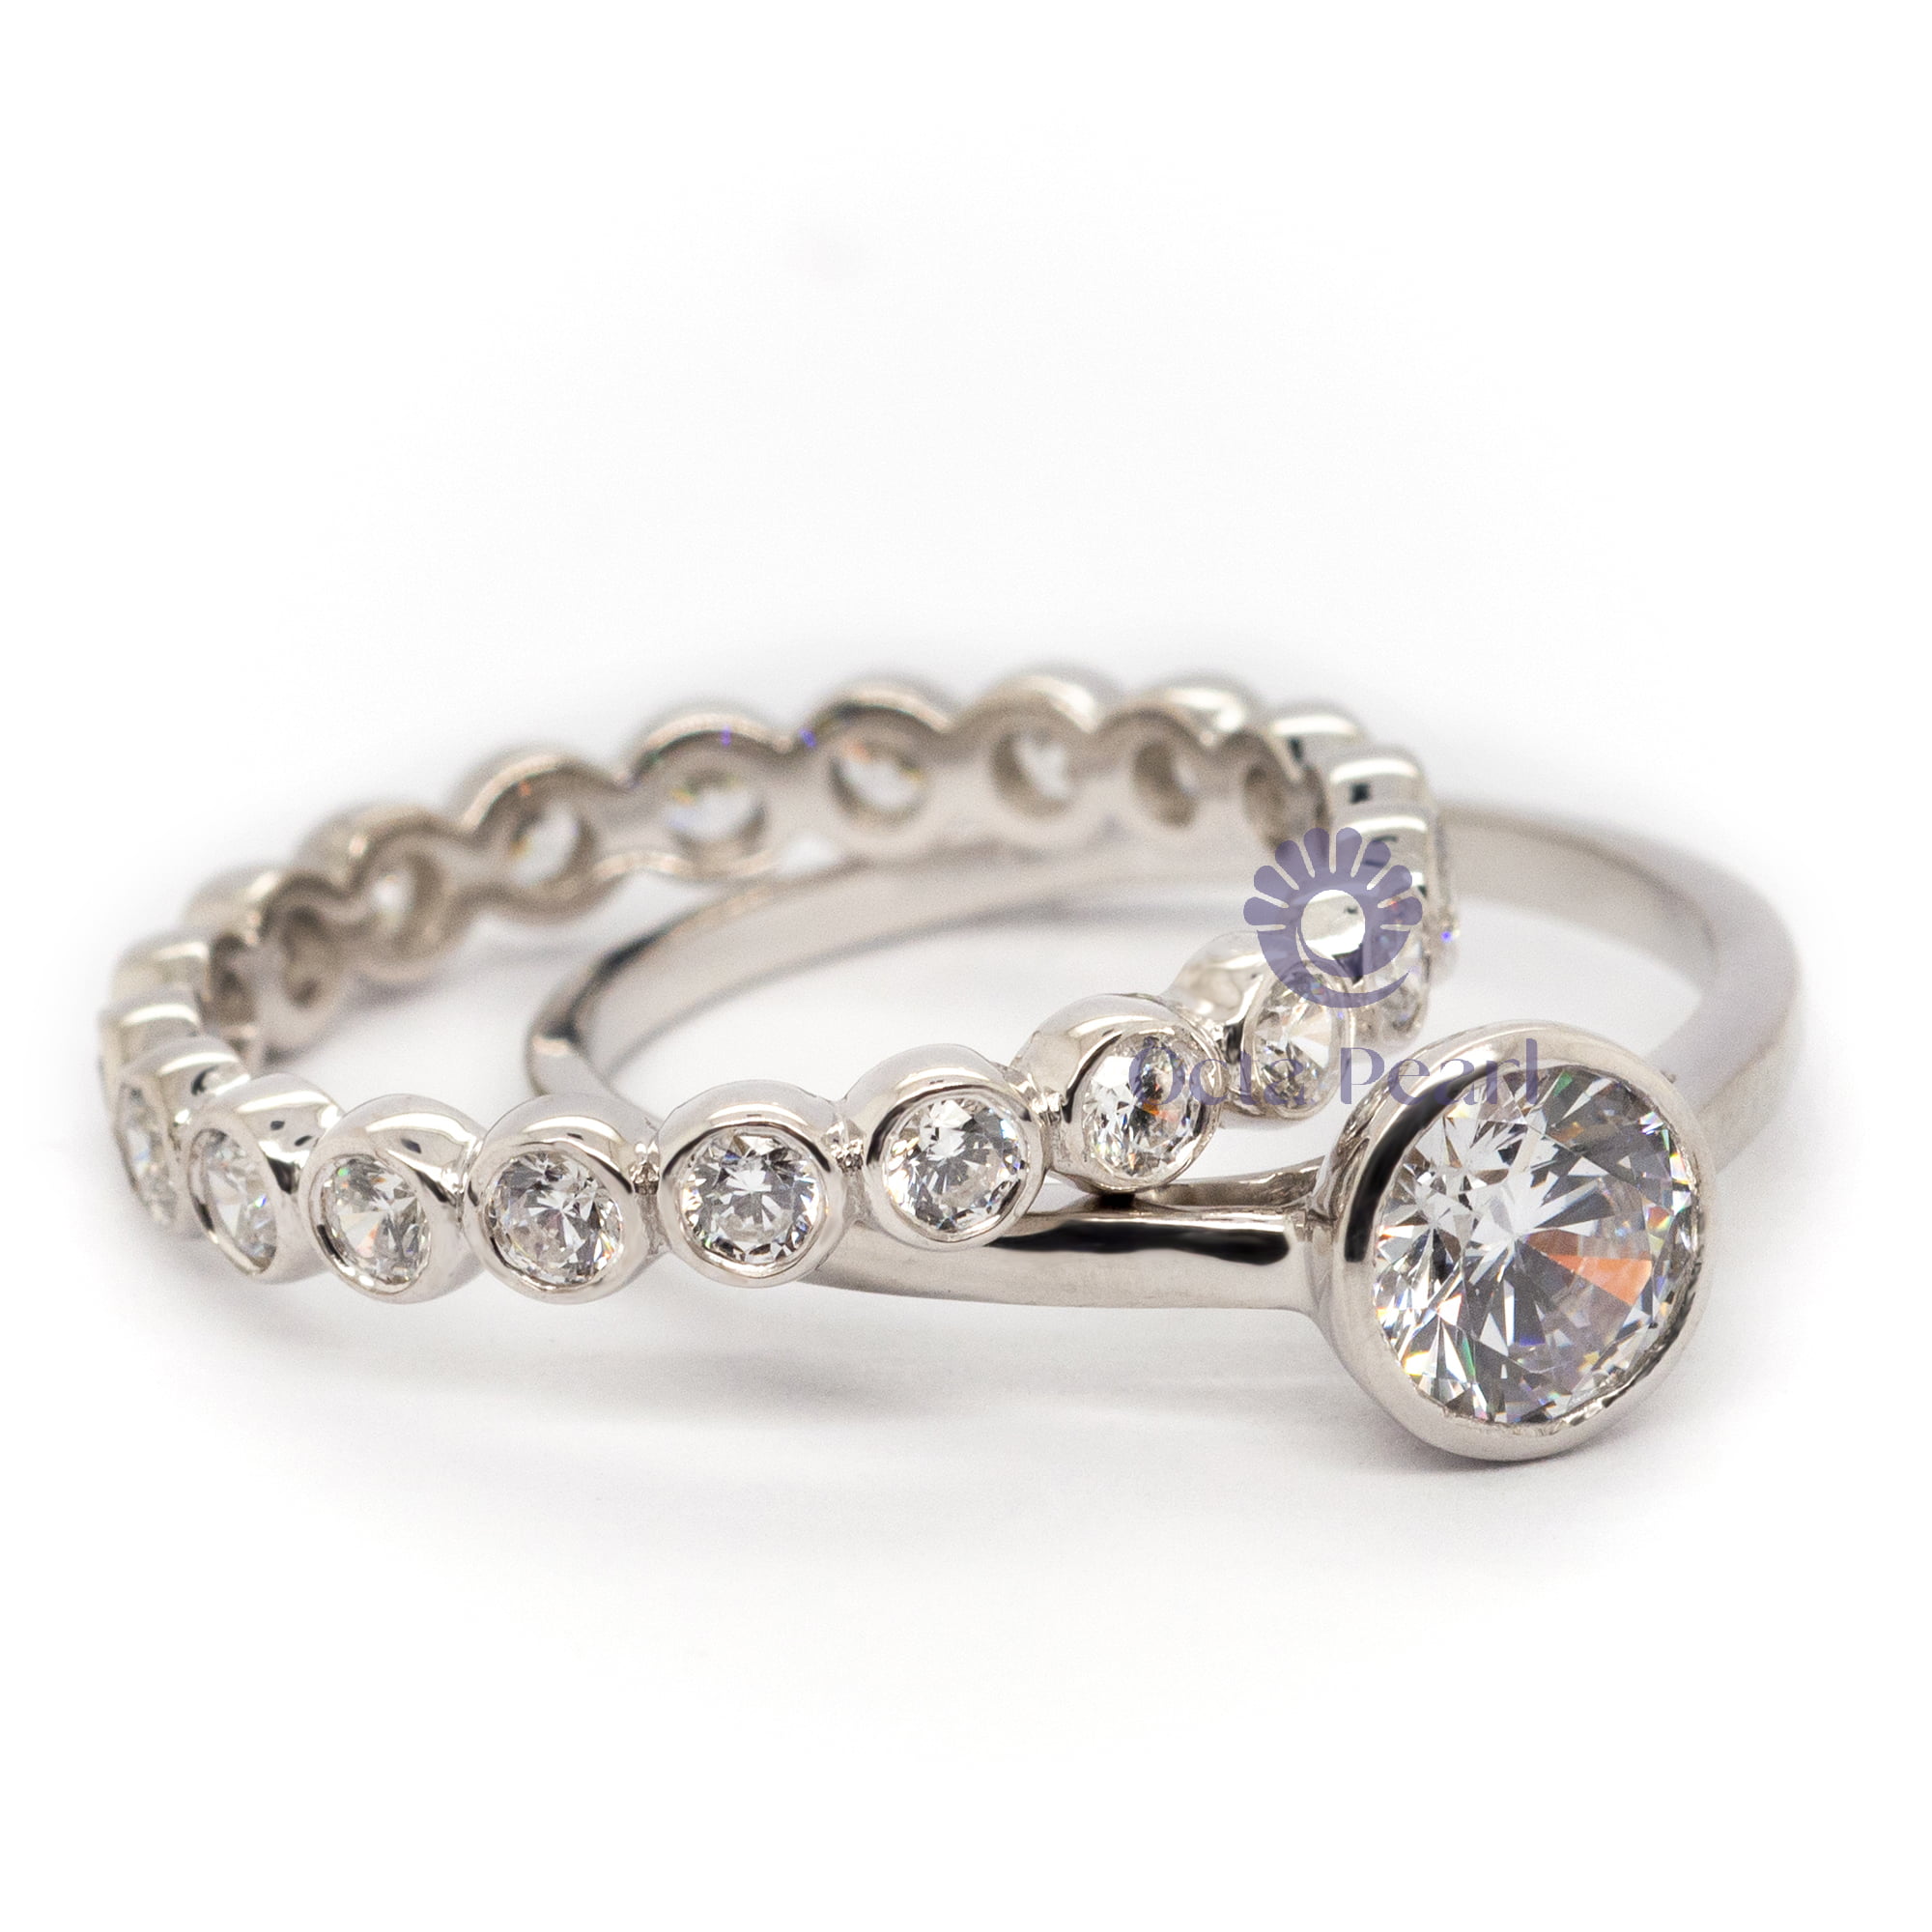 Bezel Set Round Cut Moissanite With Eternity Band Ring Set For Her (2 1/7 TCW)